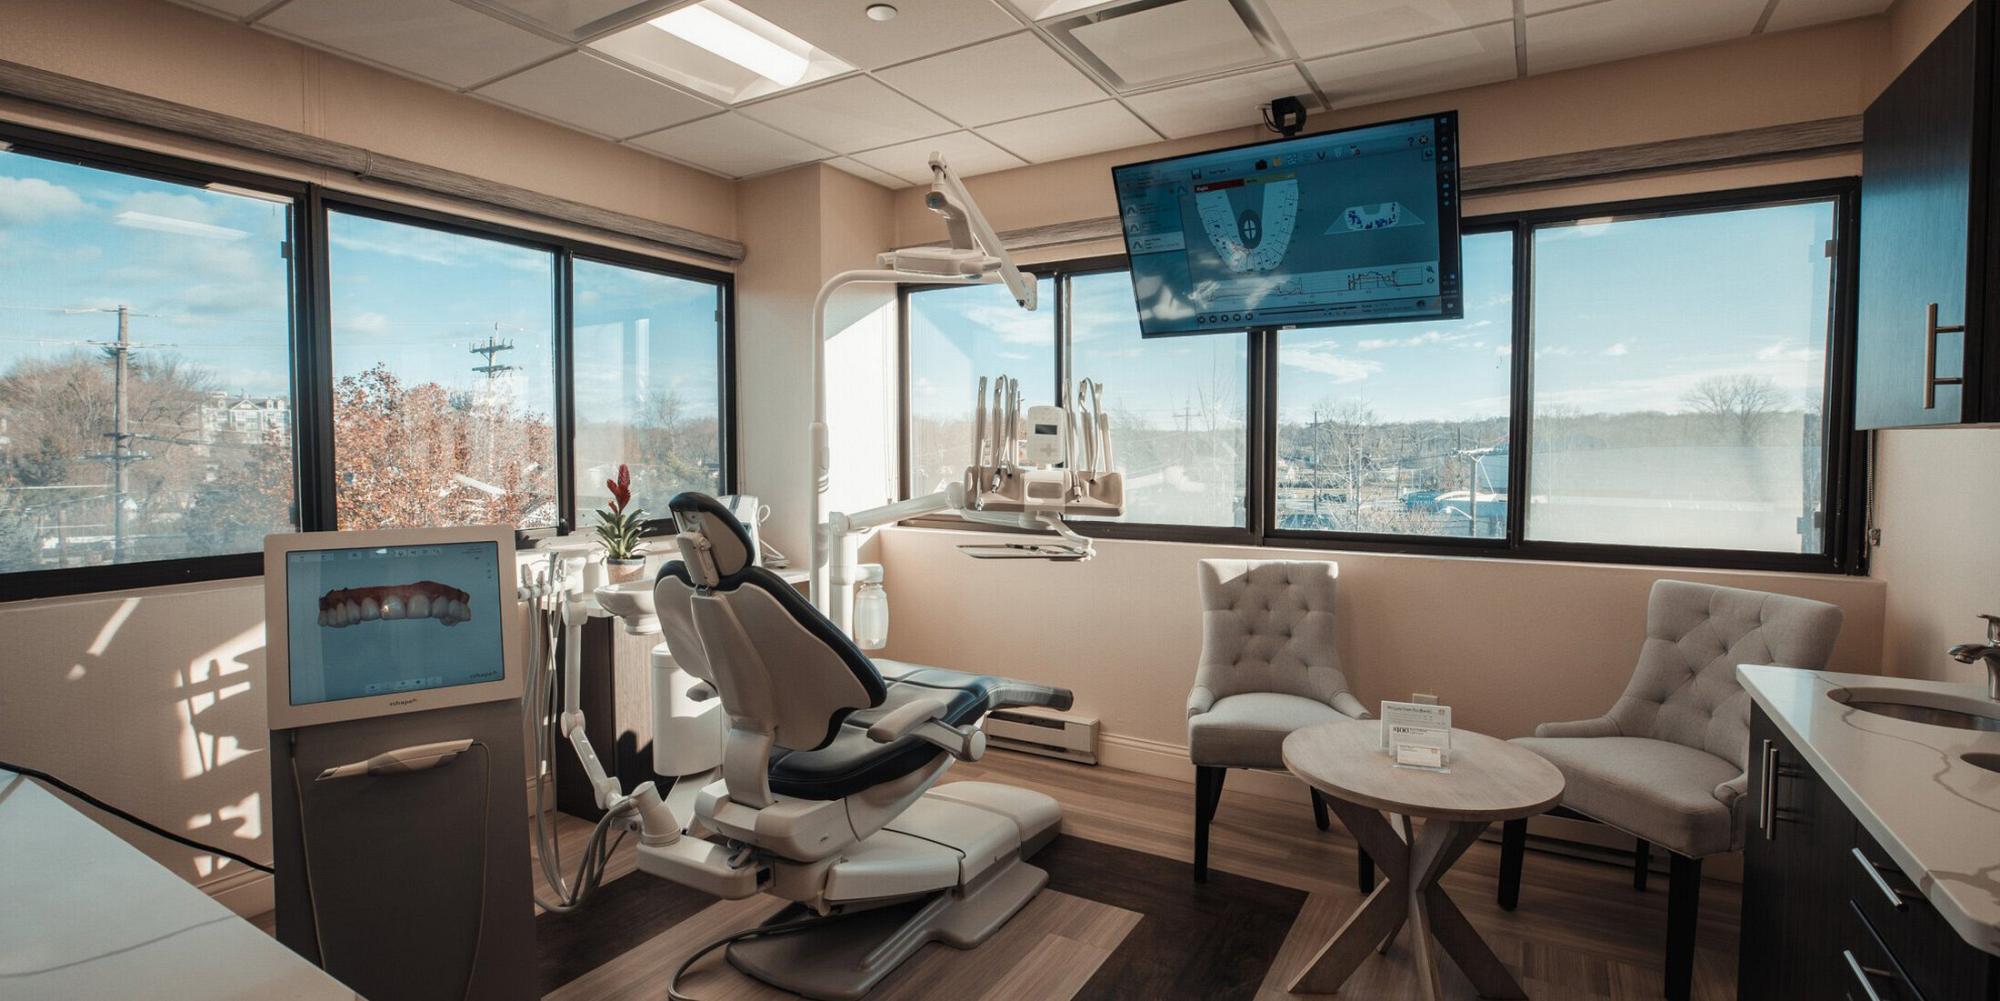 New Jersey Cosmetic Dentistry patient room